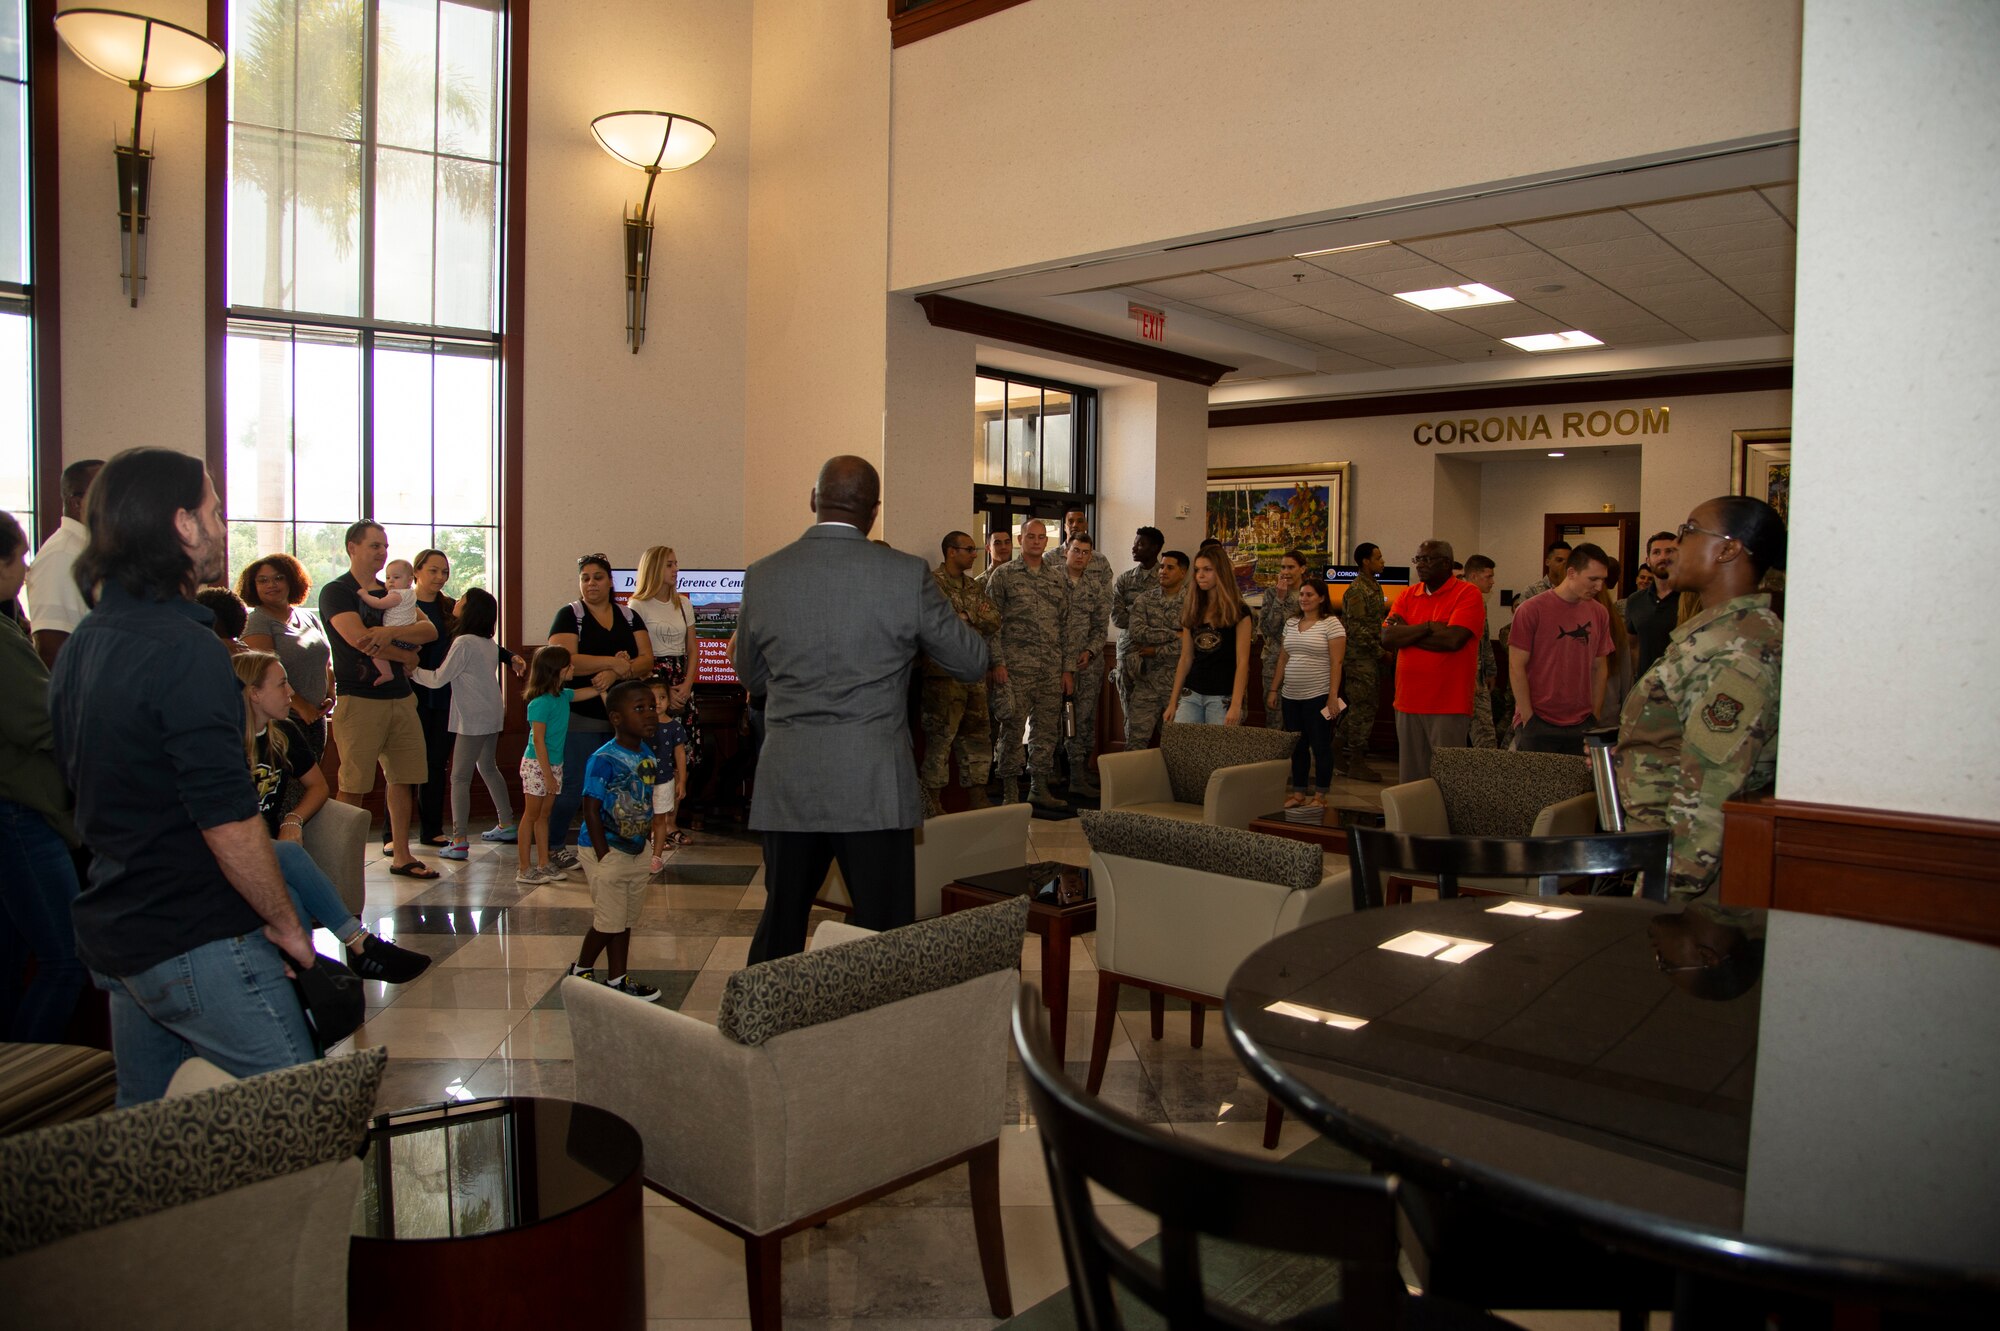 Airmen assigned to the 6th Communications Squadron and their families receive a briefing about the importance of the Davis Conference Center during an open house at MacDill Air Force Base, Fla., August 9, 2019.